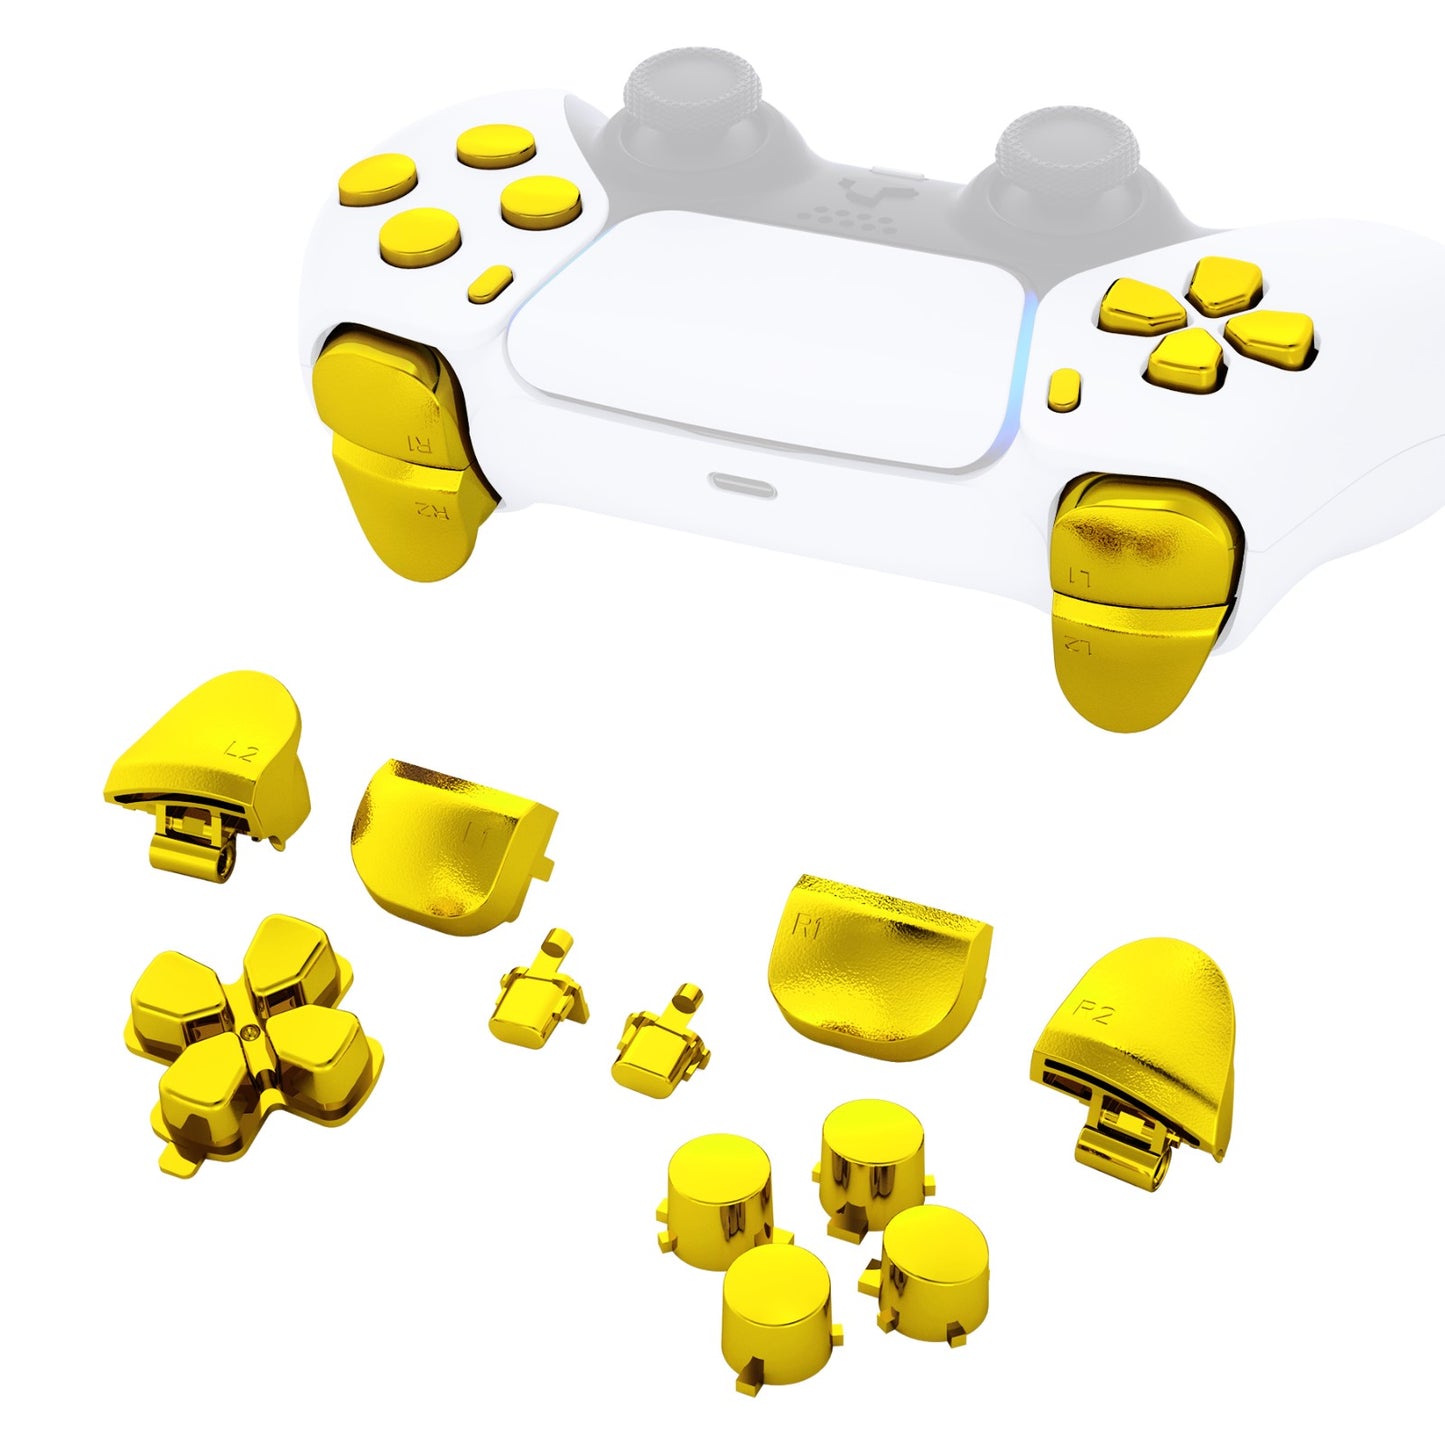 eXtremeRate Retail Replacement D-pad R1 L1 R2 L2 Triggers Share Options Face Buttons, Chrome Gold Full Set Buttons Compatible With ps5 Controller BDM-010 & BDM-020 - JPF2001G2